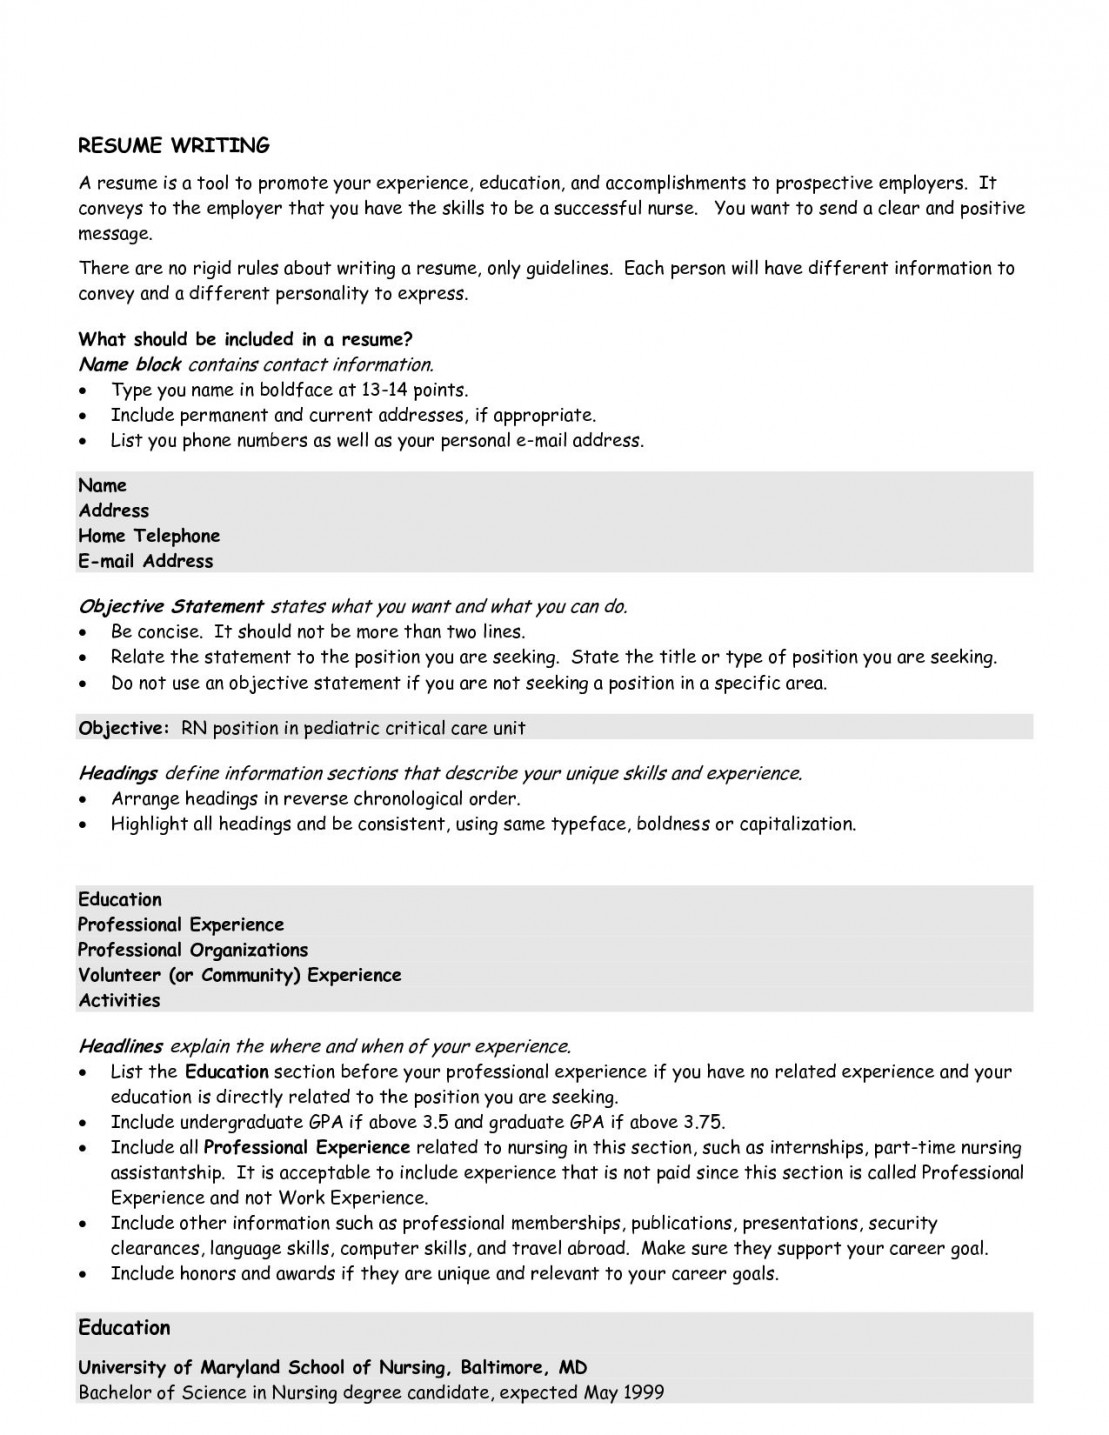 Resume Objective Statement Good Resume Objective Job Finance New Other Examples Statements For The Perfect Resume Objective resume objective statement|wikiresume.com